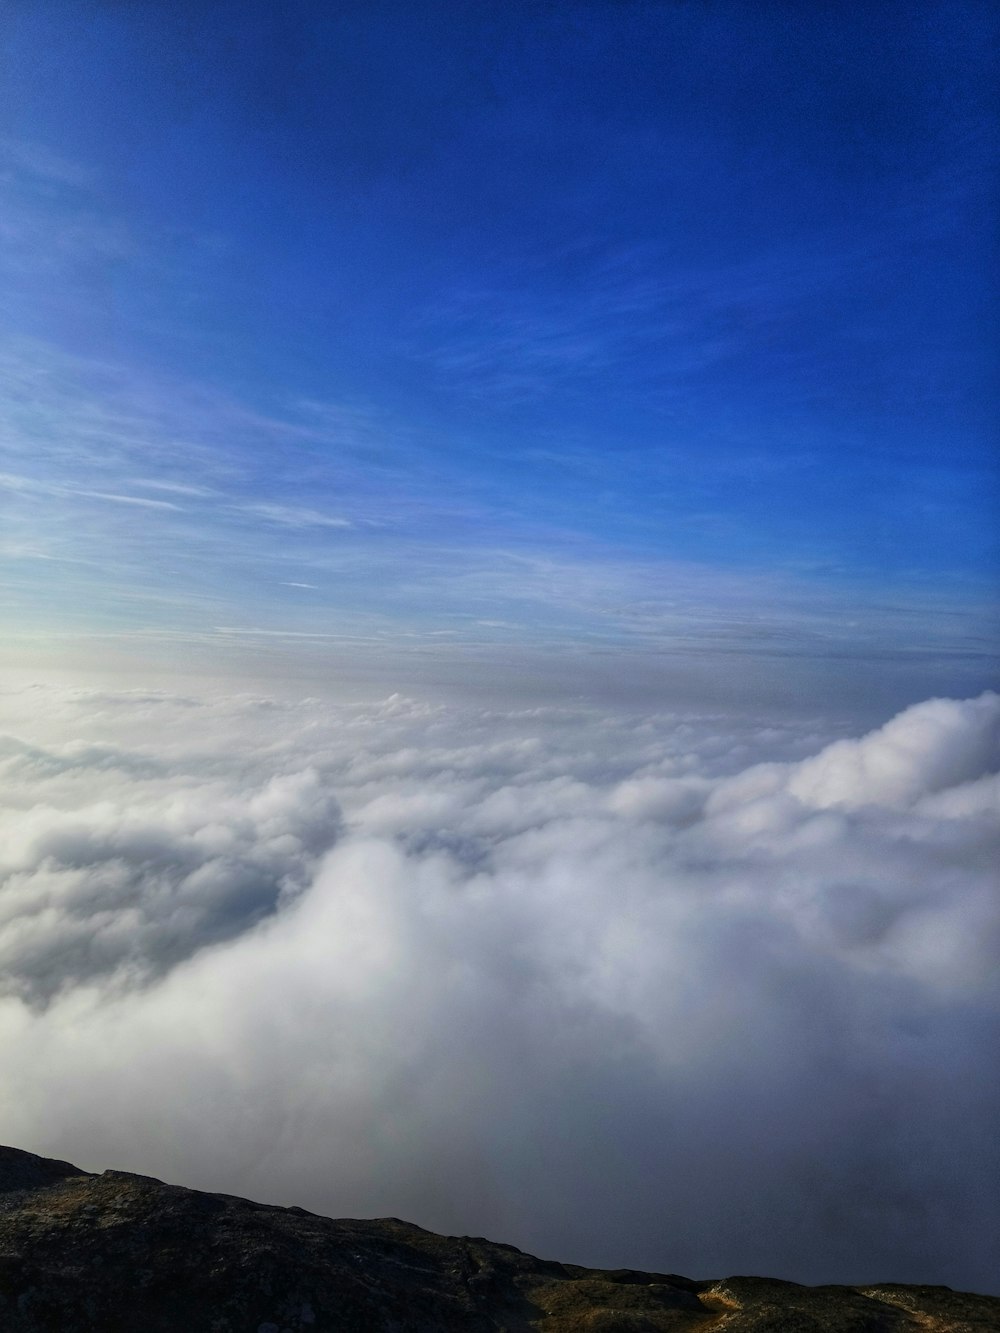 a view of the clouds from the top of a mountain